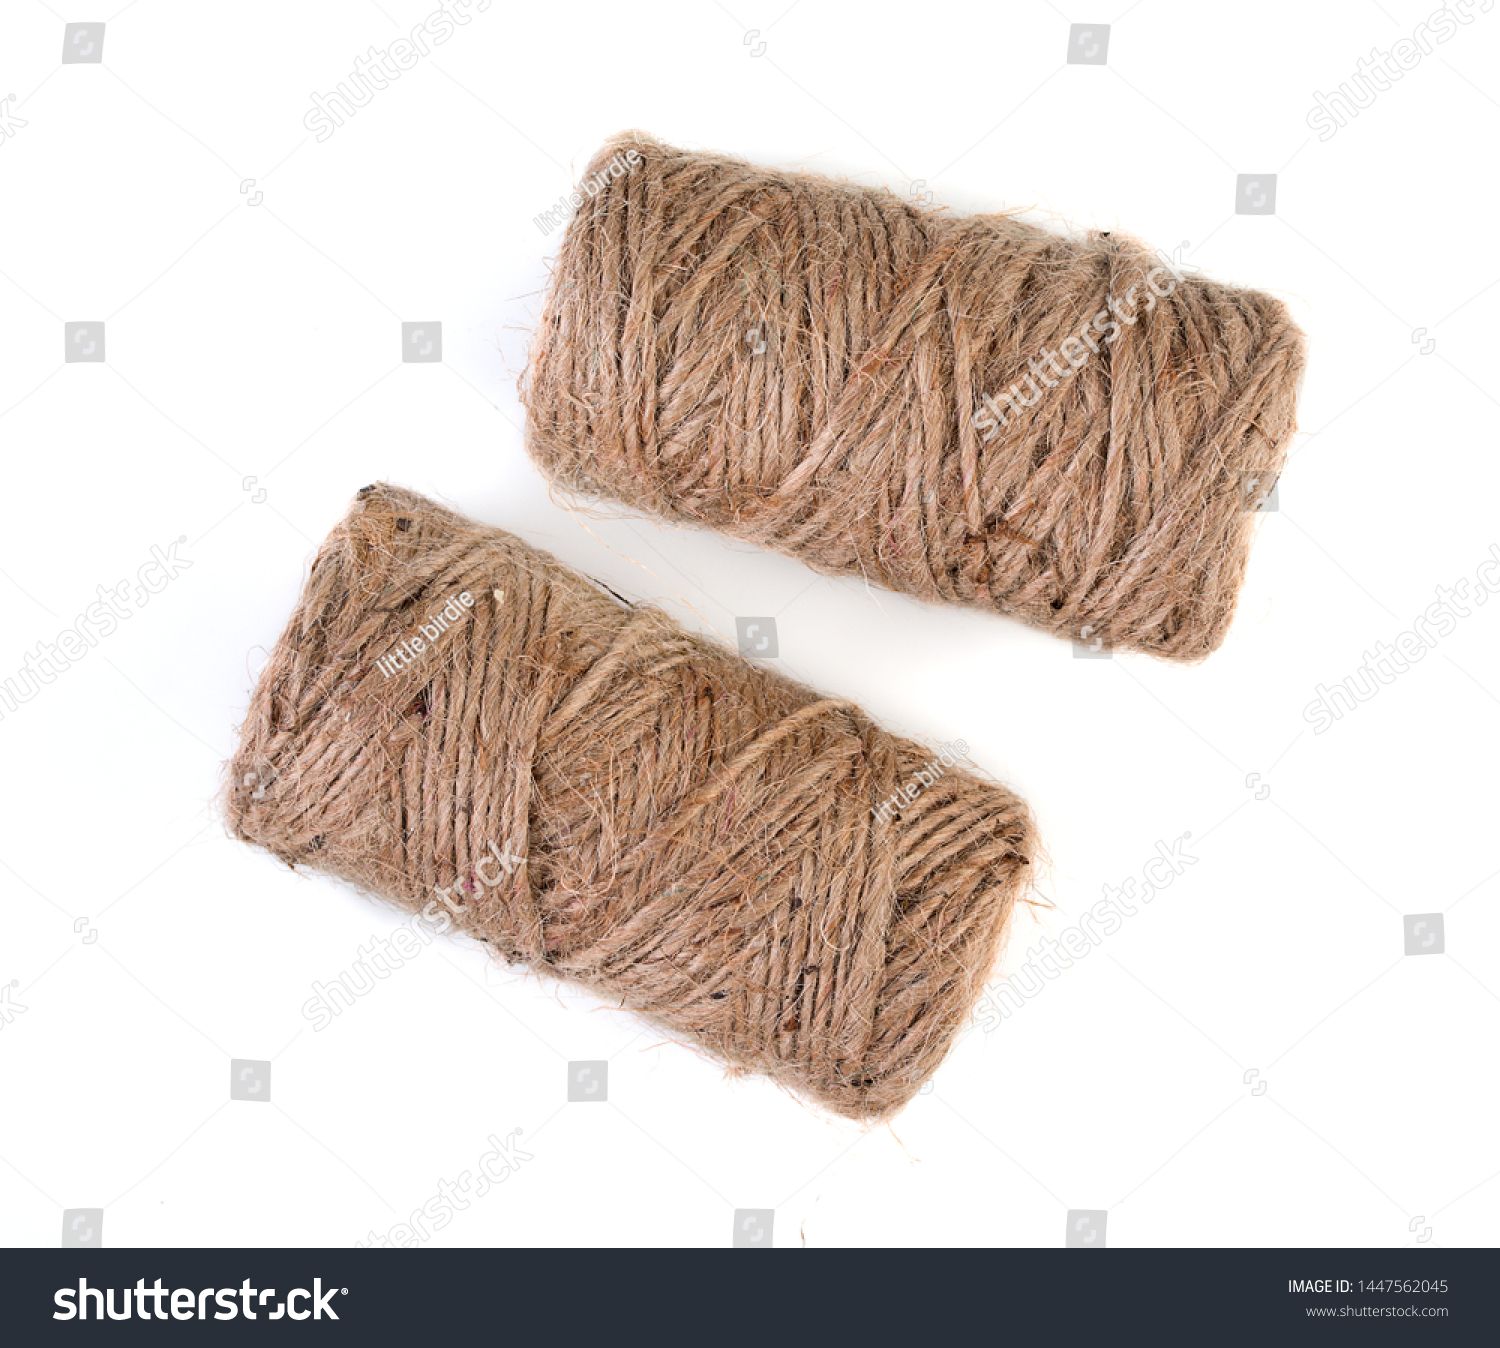 Pair of spools of natural linen twine, isolated on white background, top view. #1447562045